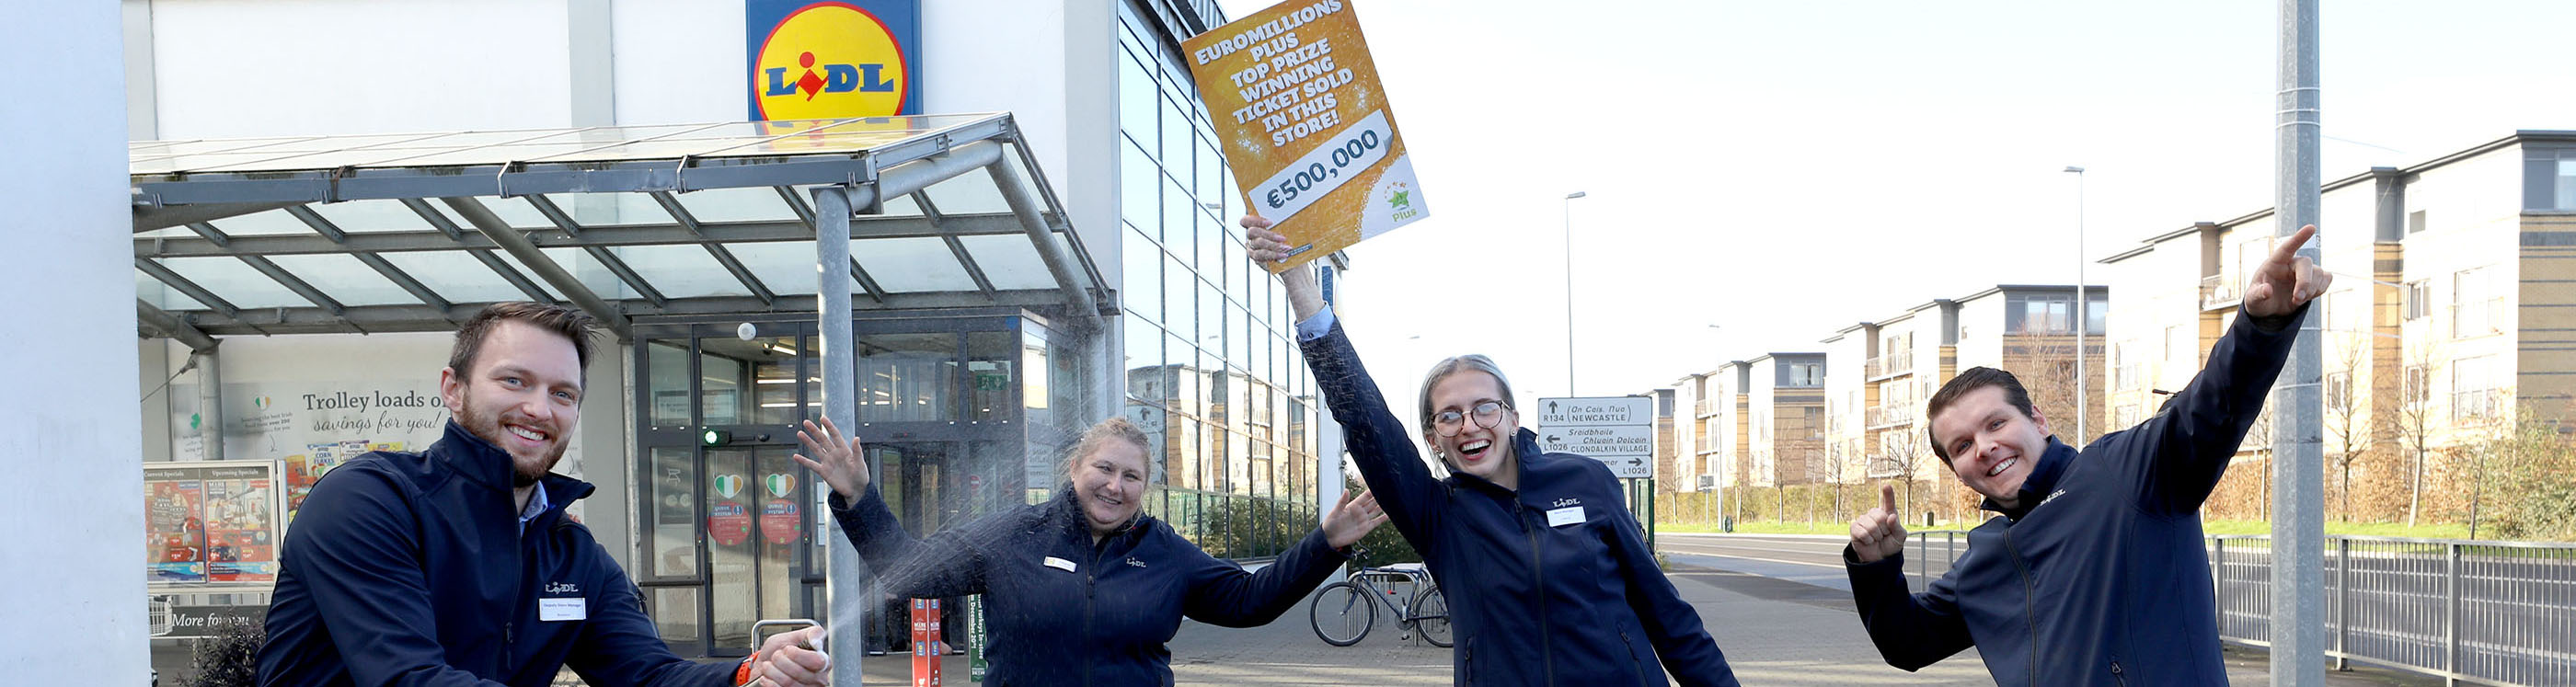 A Dublin family who claimed a €500,000 EuroMillions Plus top prize win with a ticket they purchased from Lidl in Clondalkin, Dublin 